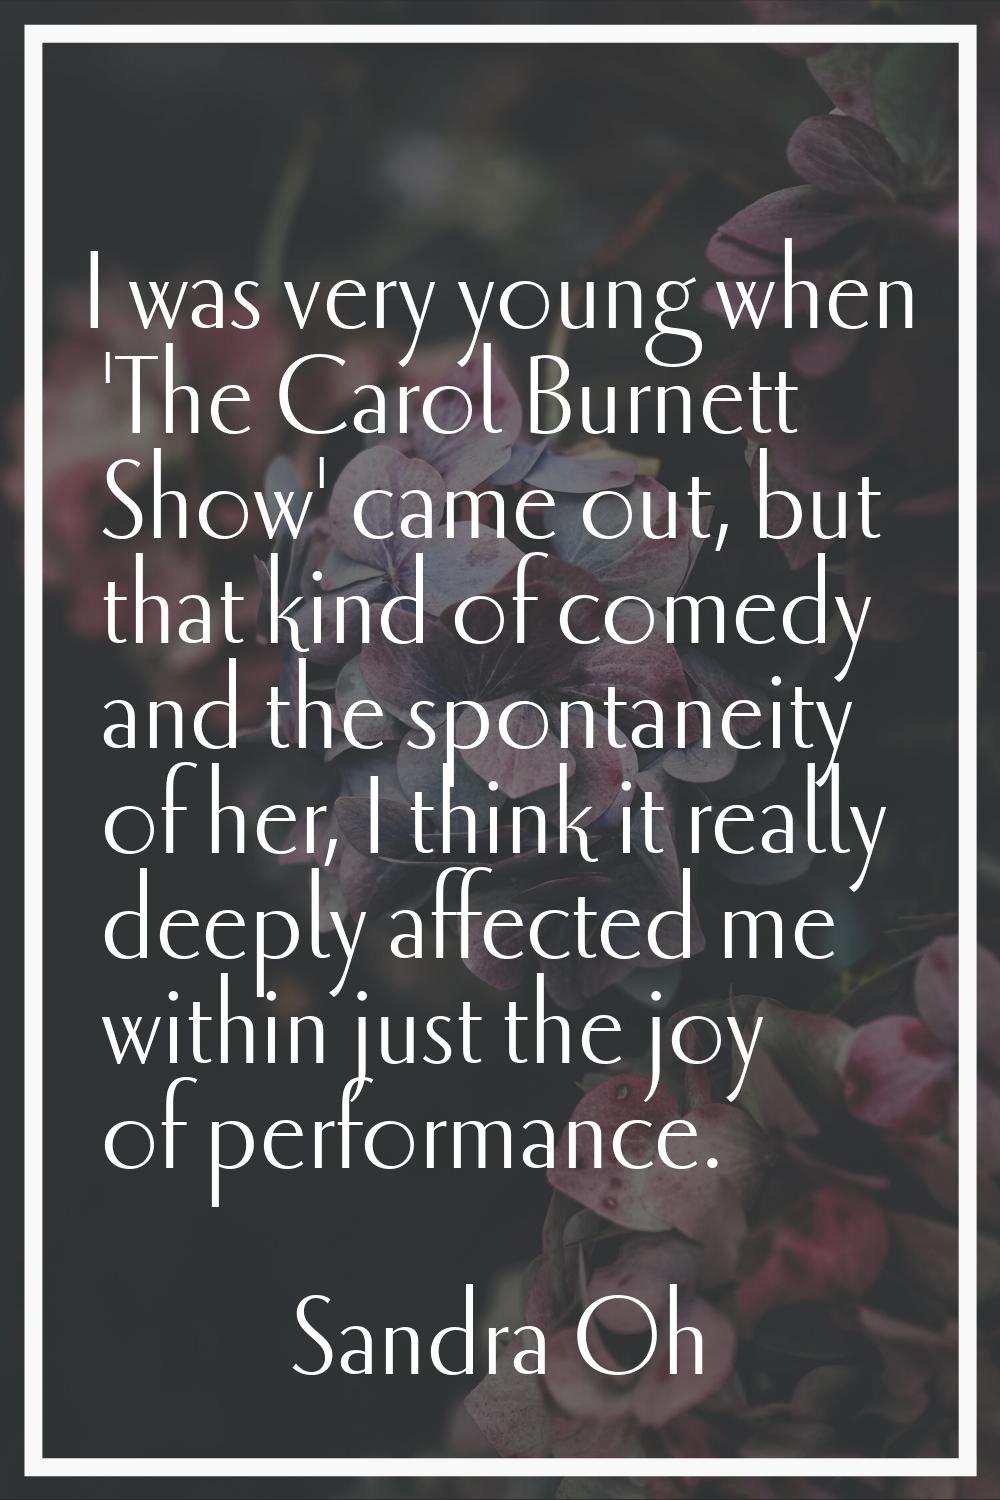 I was very young when 'The Carol Burnett Show' came out, but that kind of comedy and the spontaneit